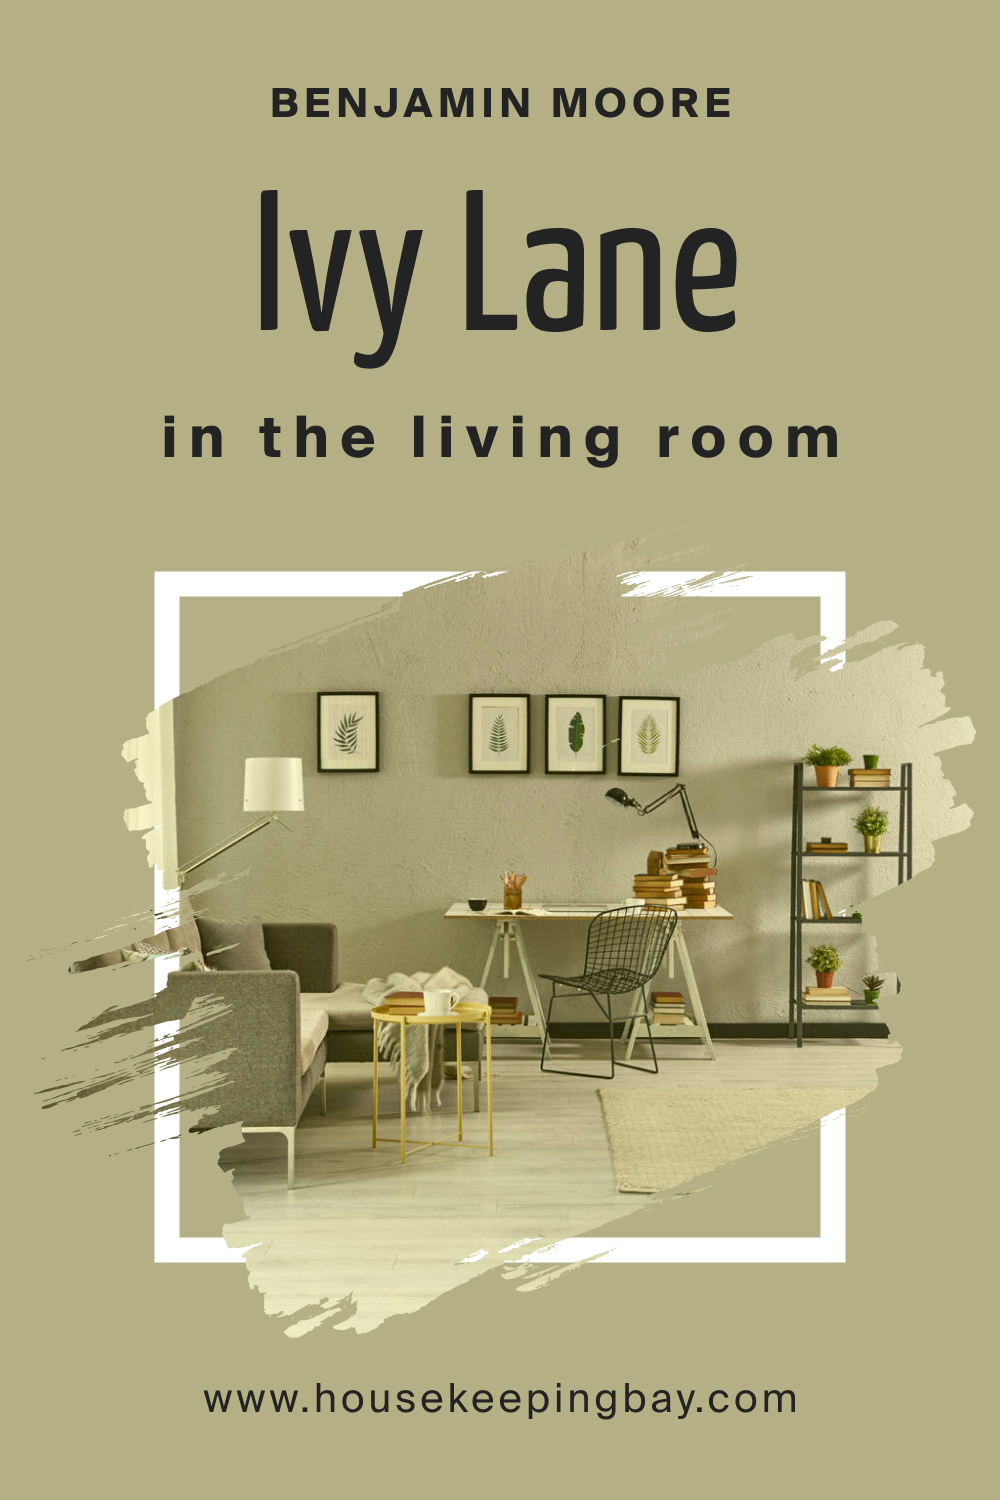 How to Use BM Ivy Lane 523 in the Living Room?